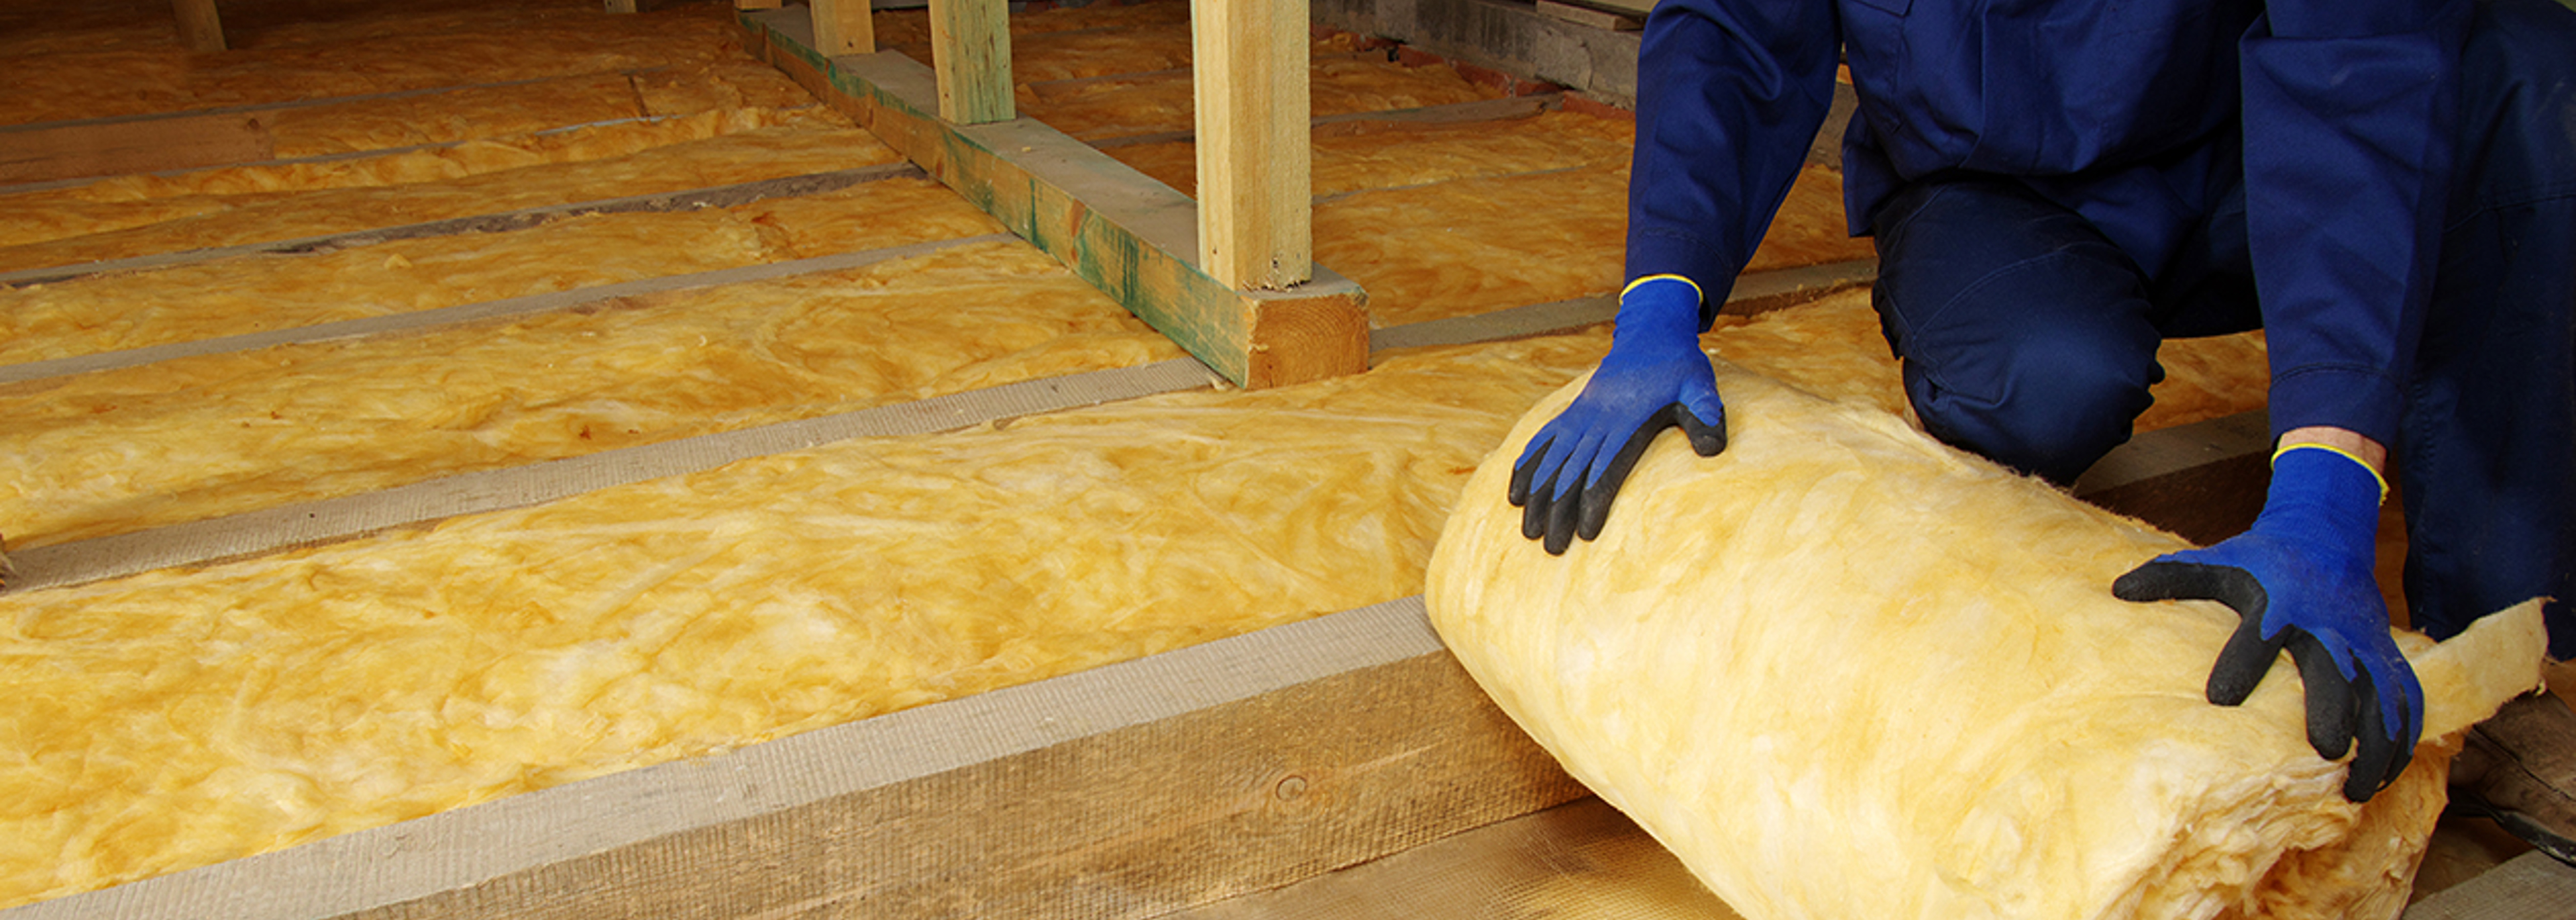 Home insulation could ease health and social crisis